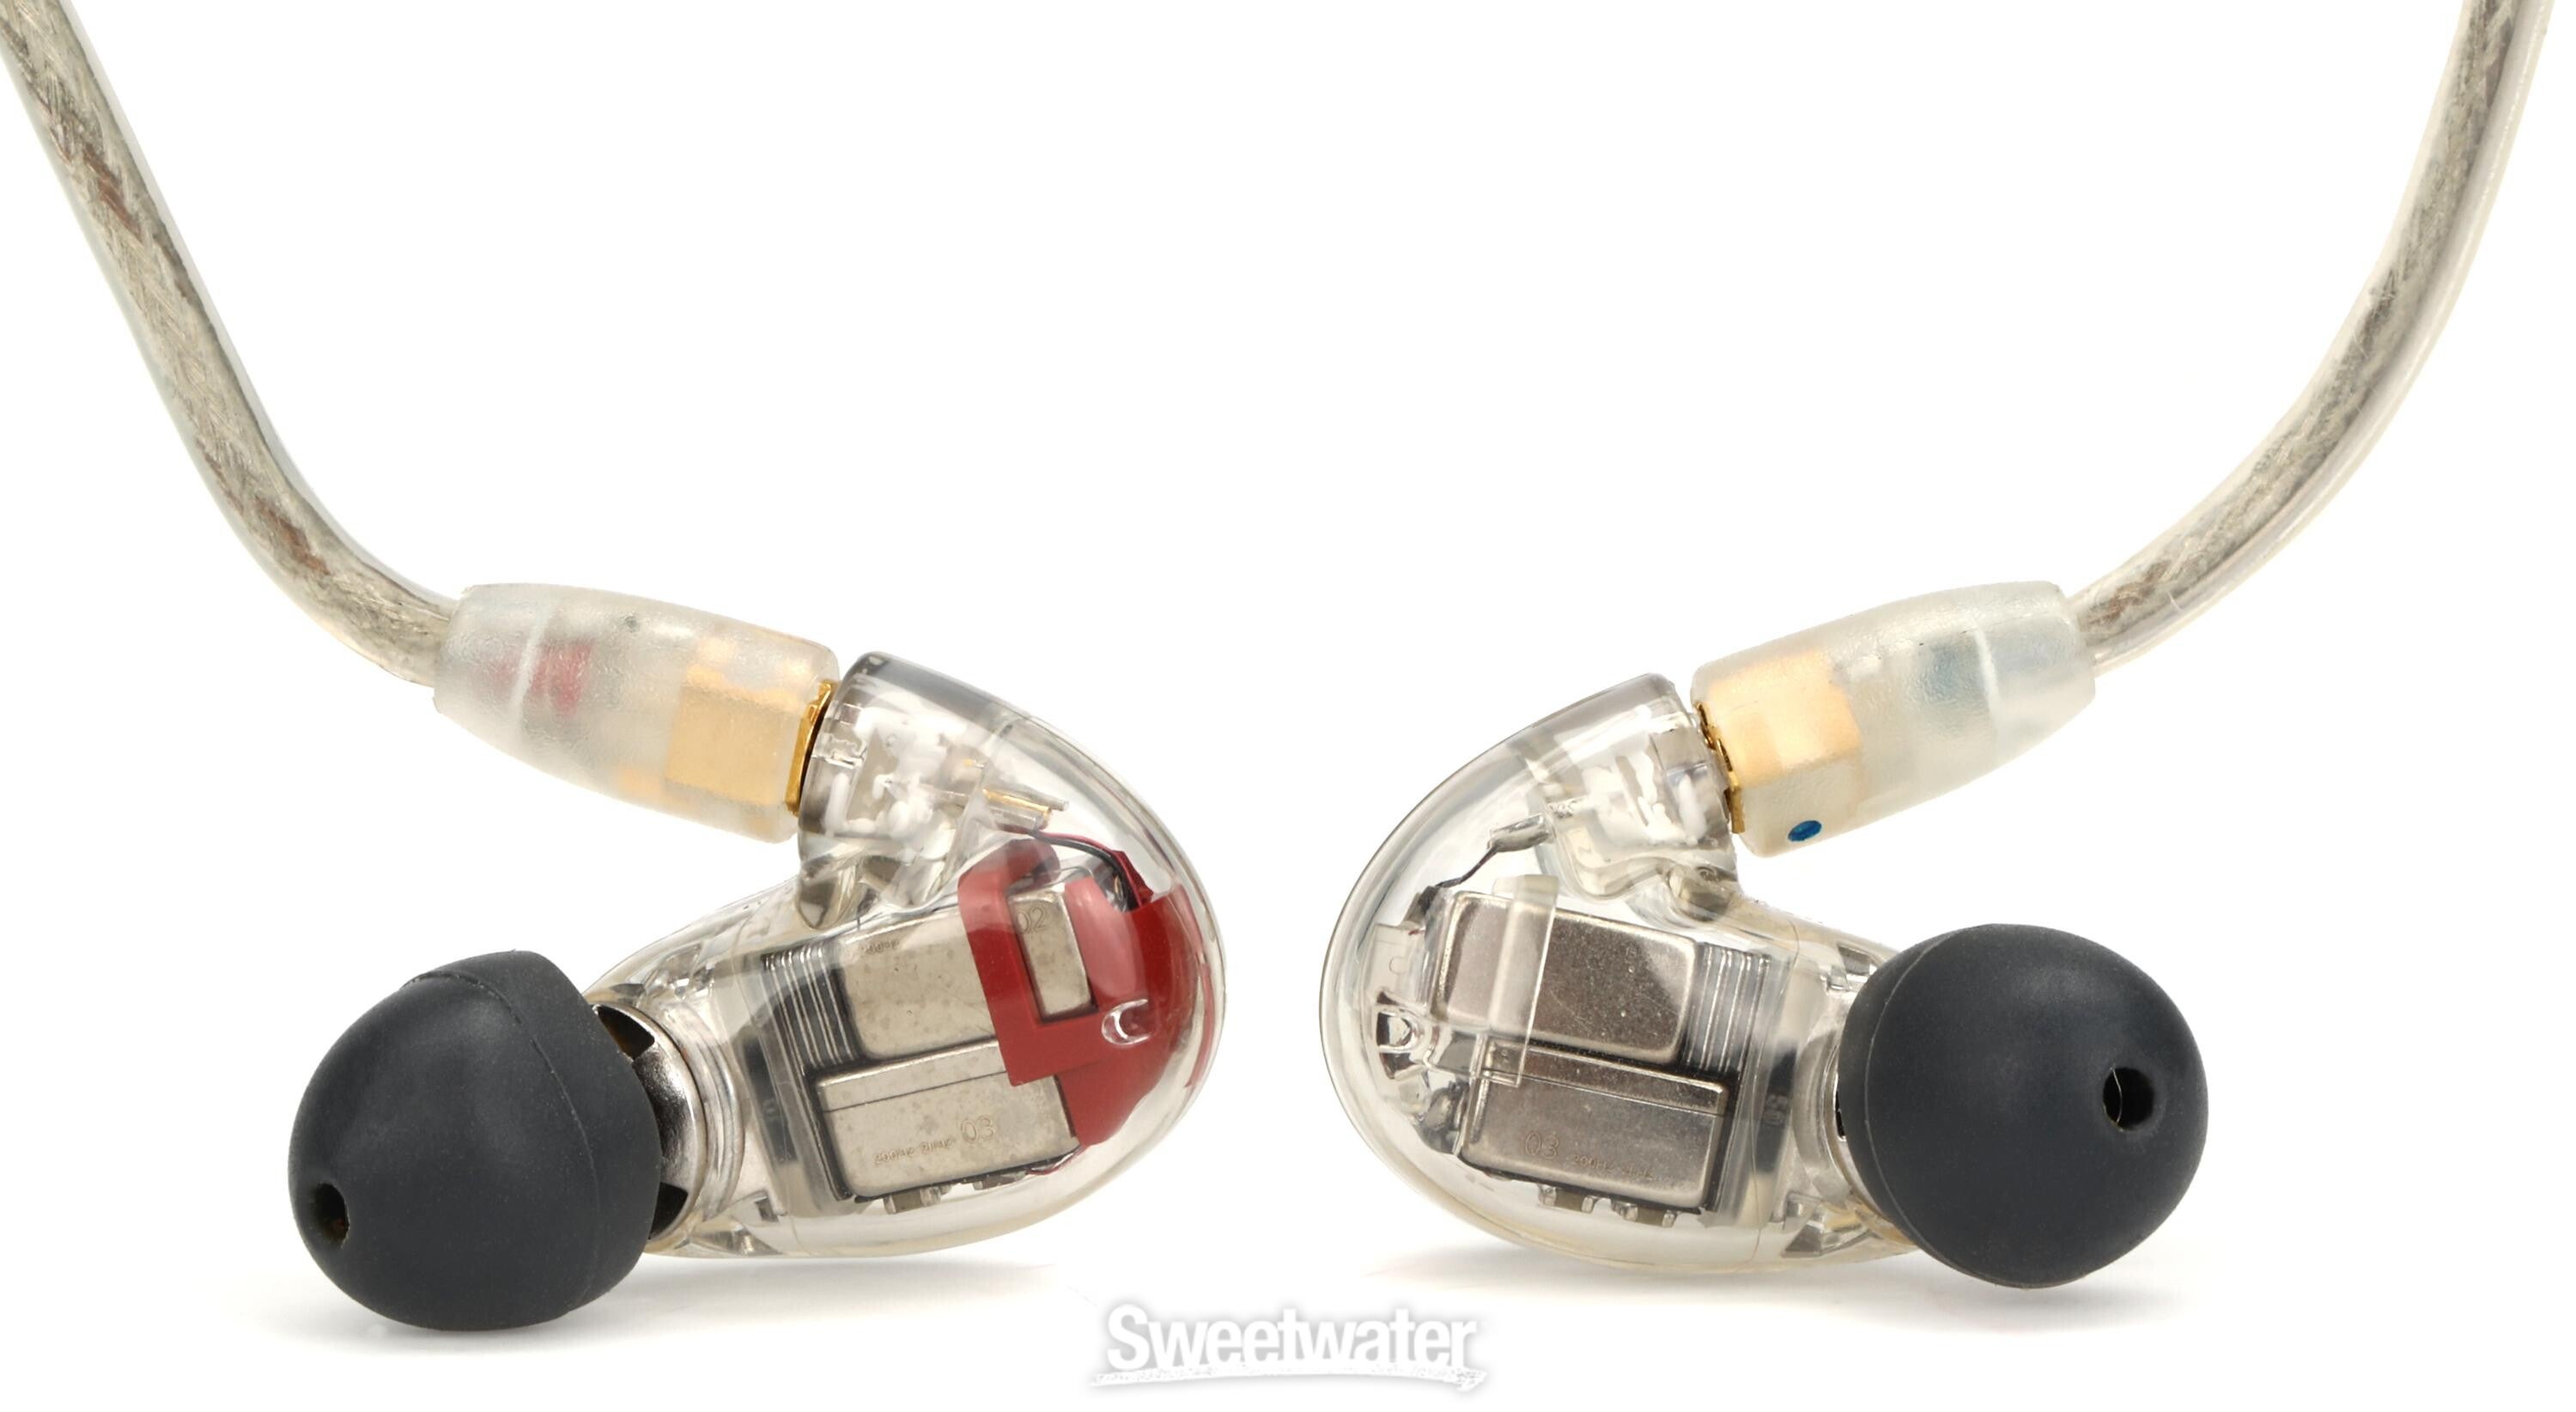 Shure SE846 Sound Isolating Earphones - Clear Reviews | Sweetwater